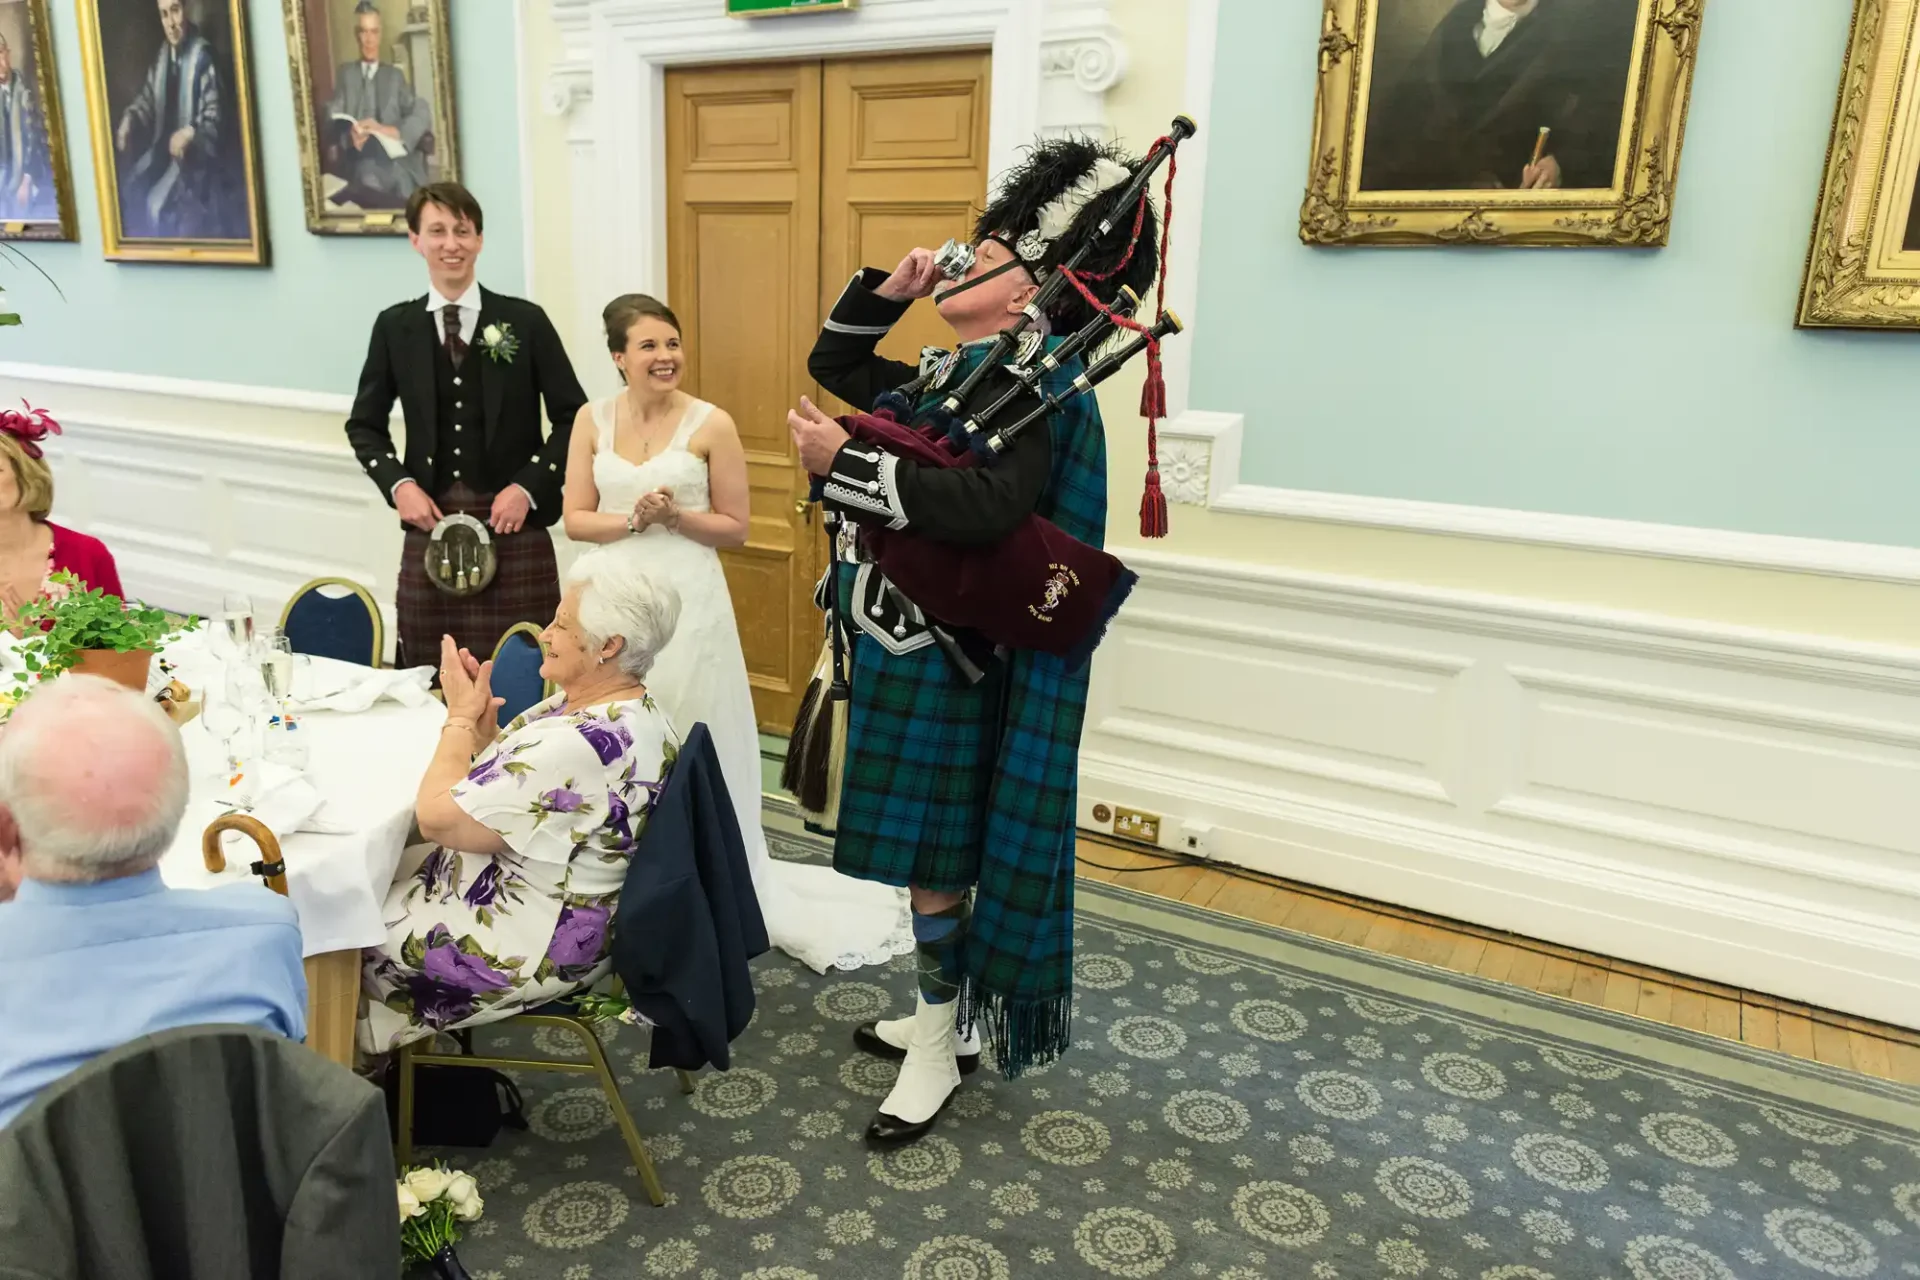 A bagpiper in traditional scottish attire playing at a wedding reception, with a smiling bride and groom seated in the background.